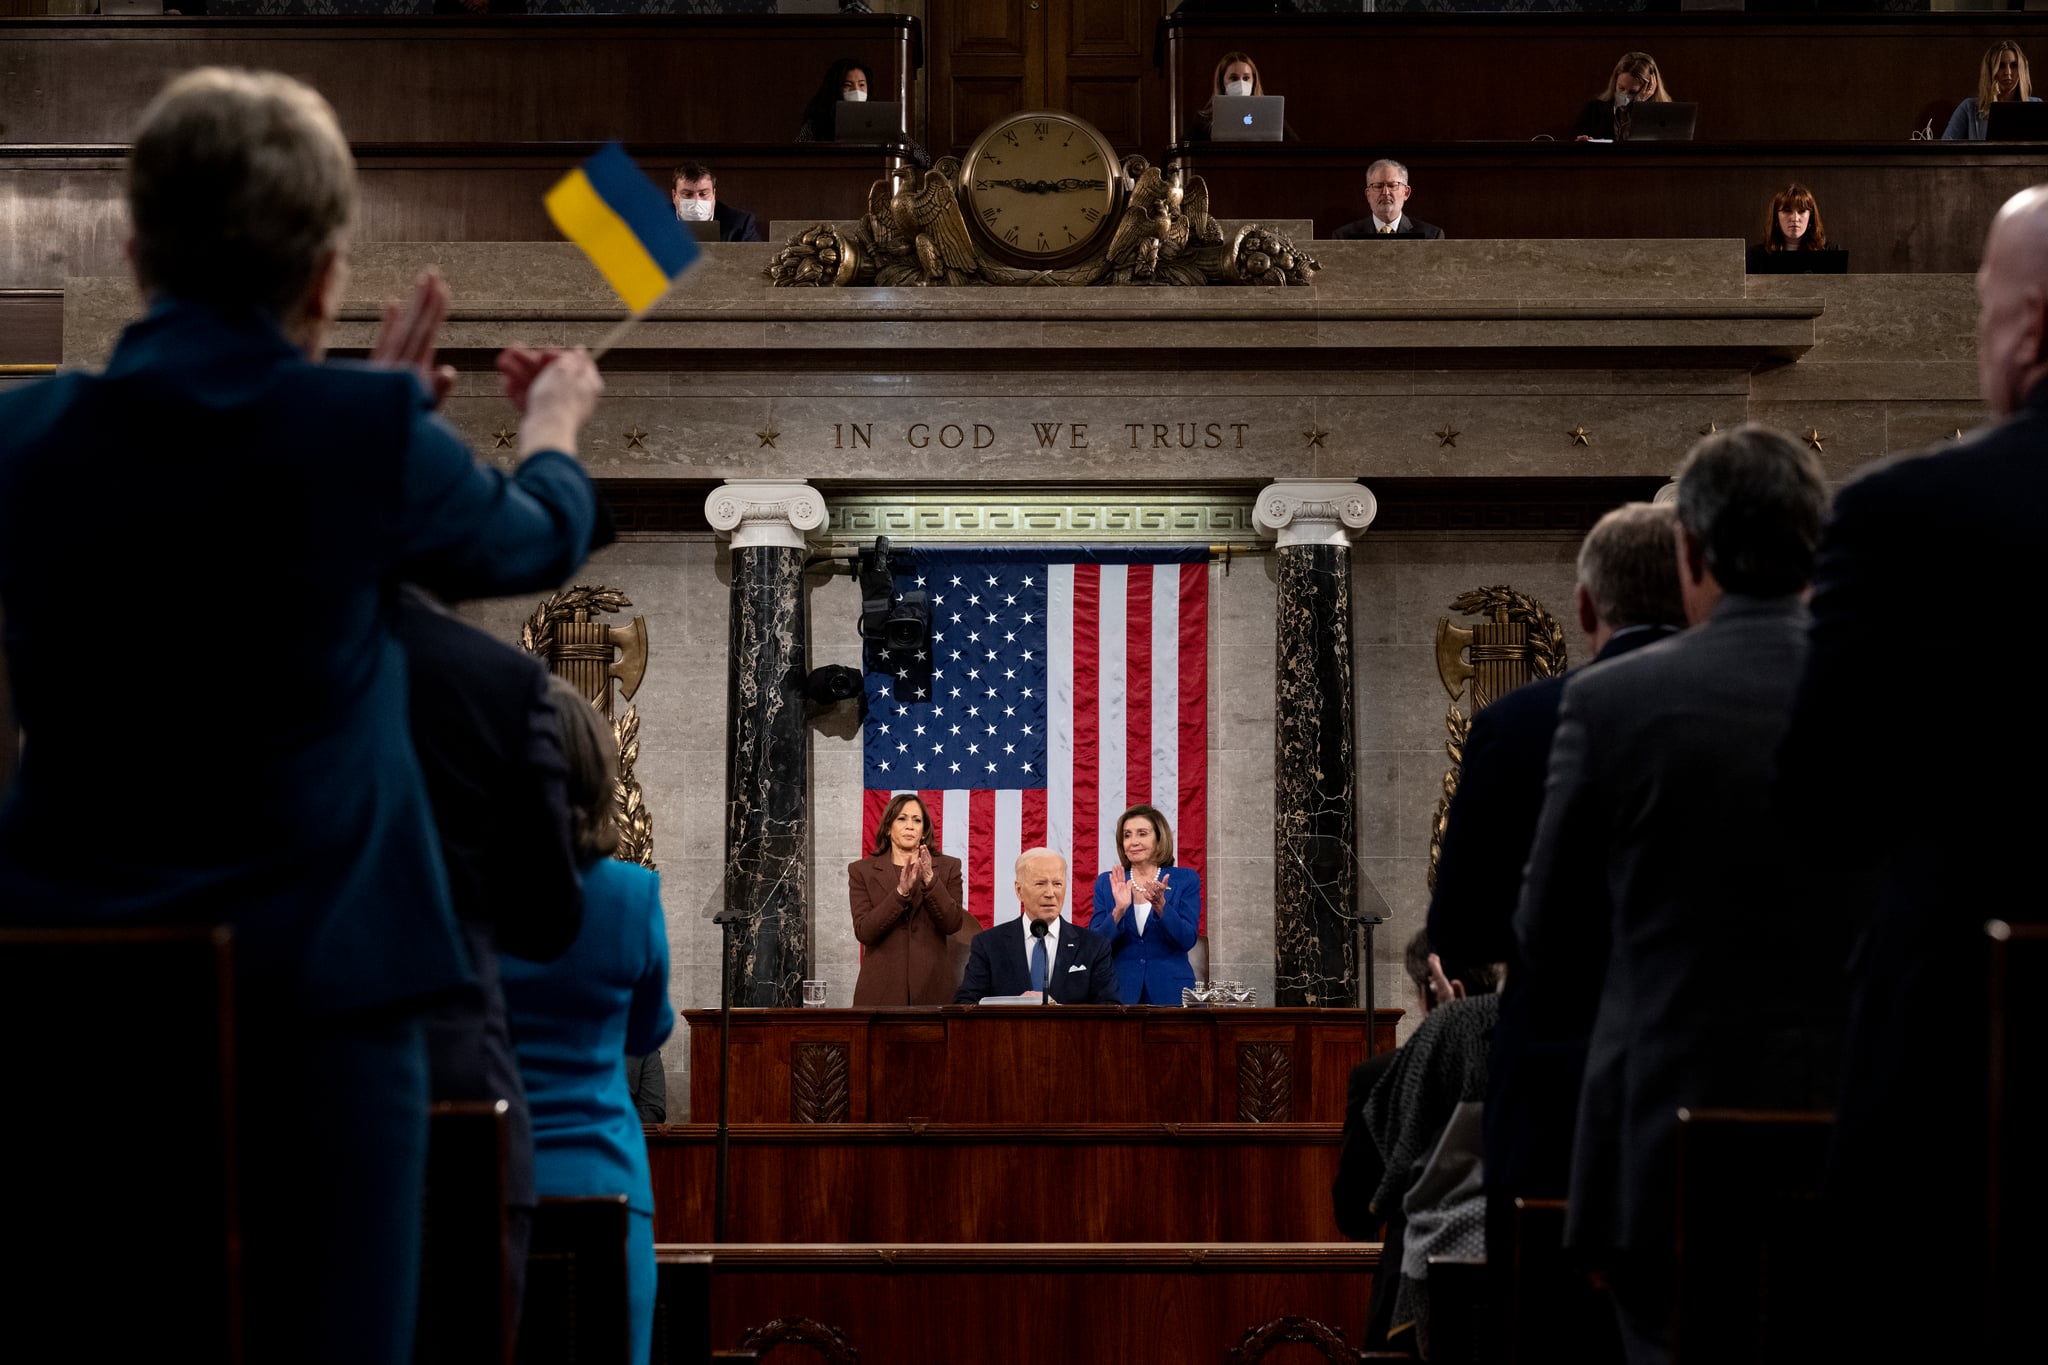 WASHINGTON, DC - MARCH 01:  A member of the U.S. Congress waives a Ukrainian flag as President Joe Biden delivers the State of the Union address to a joint session of Congress in the U.S. Capitol House Chamber on March 1, 2022  in Washington, DC. In his first State of the Union address, Biden spoke on his administration's efforts to lead a global response to the Russian invasion of Ukraine, work to curb inflation, and bring the country out of the COVID-19 pandemic. (Photo by Saul Loeb - Pool/Getty Images)